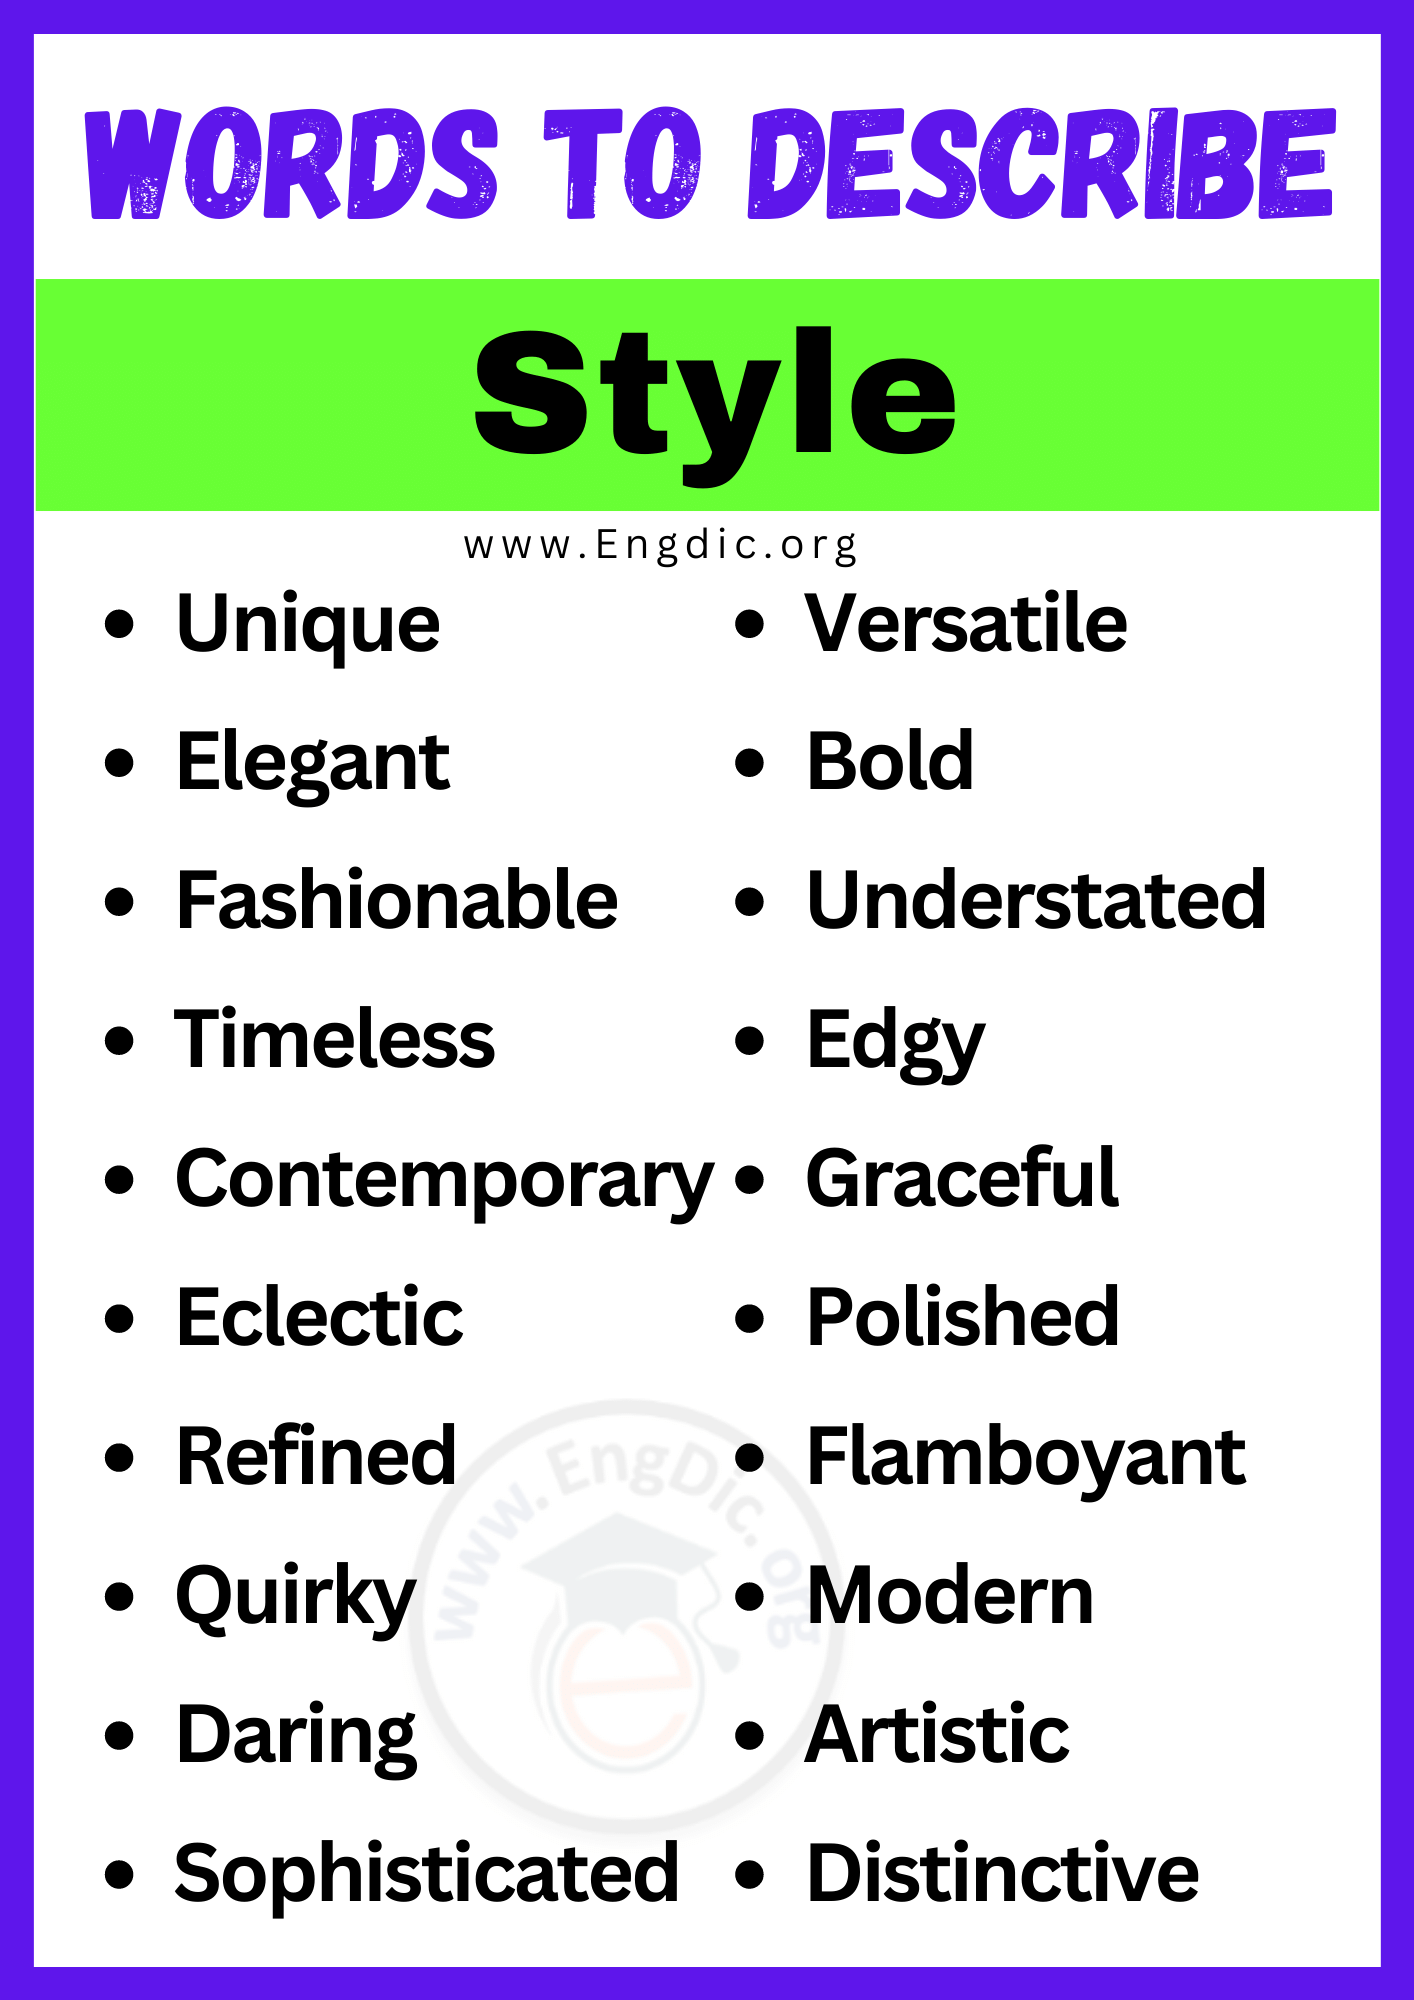 Words to Describe Style